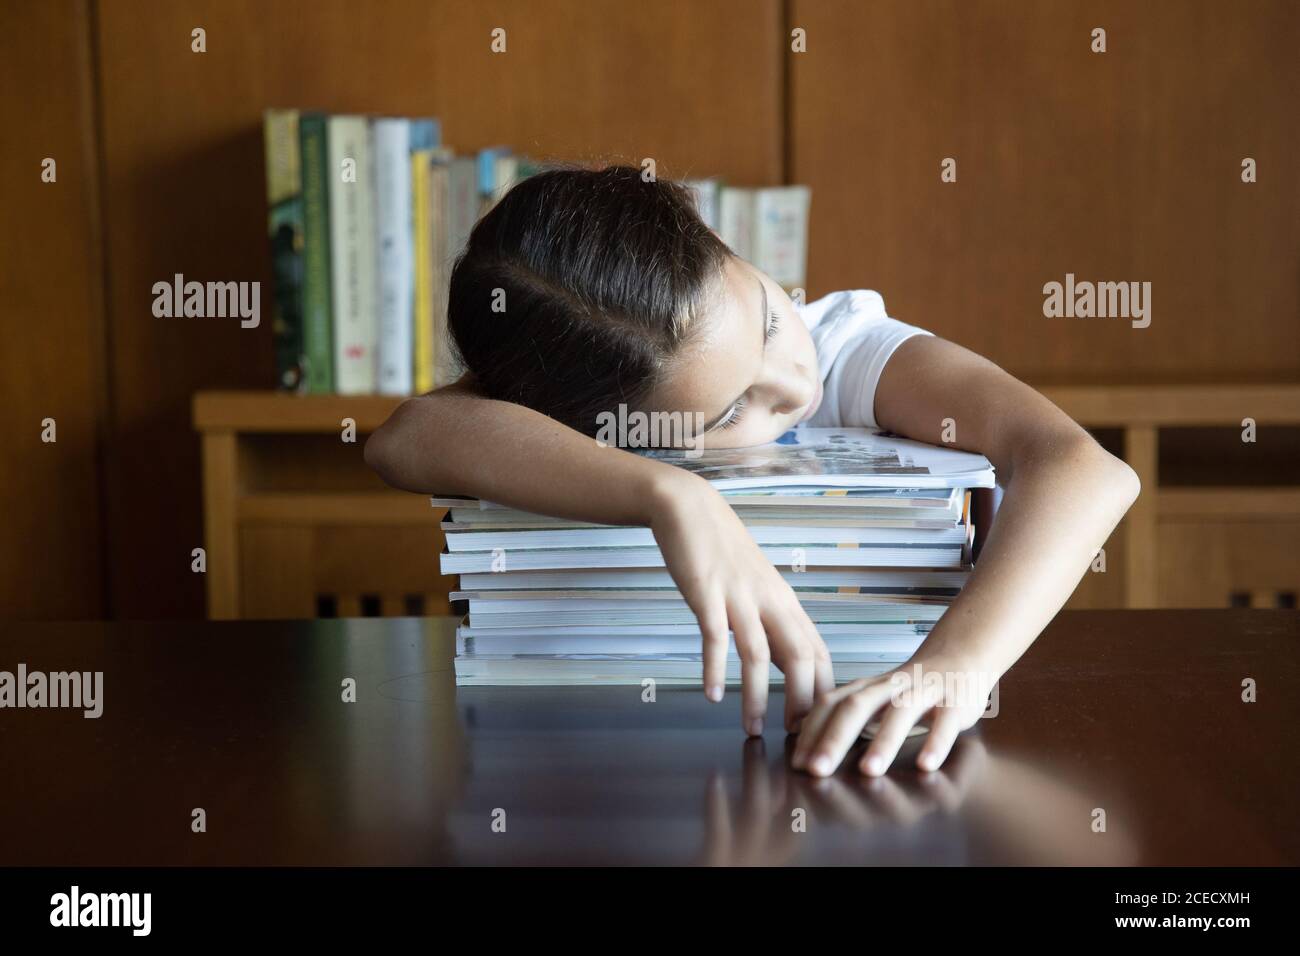 Young student who has fallen asleep on top of textbooks after doing homework for several hours Stock Photo